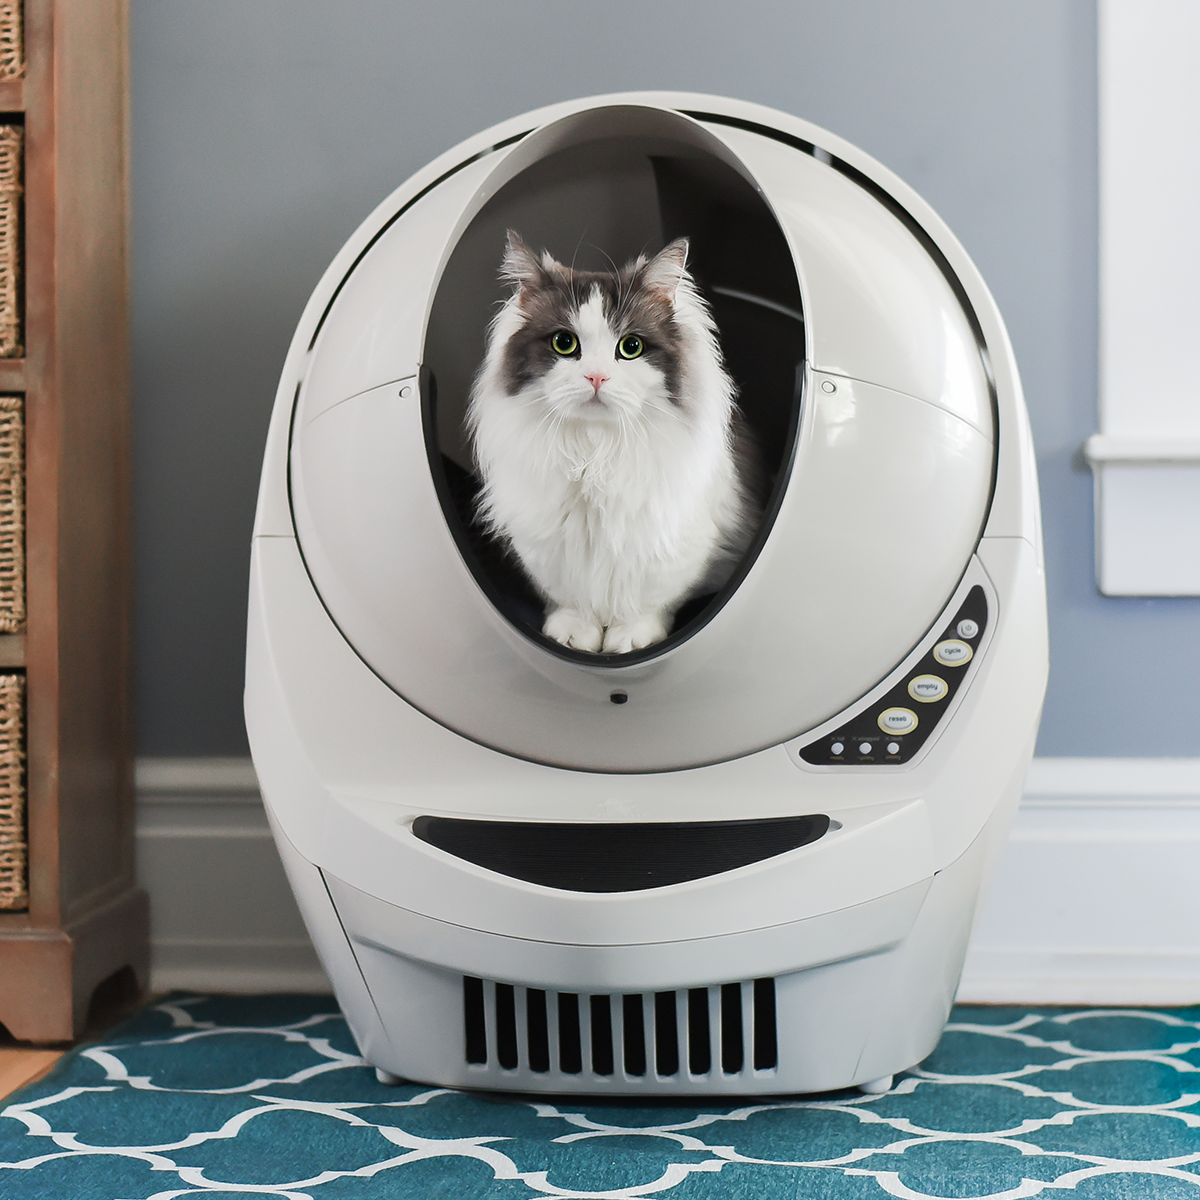 Automatic Self Cleaning Litter Box For Cats Litter Robot